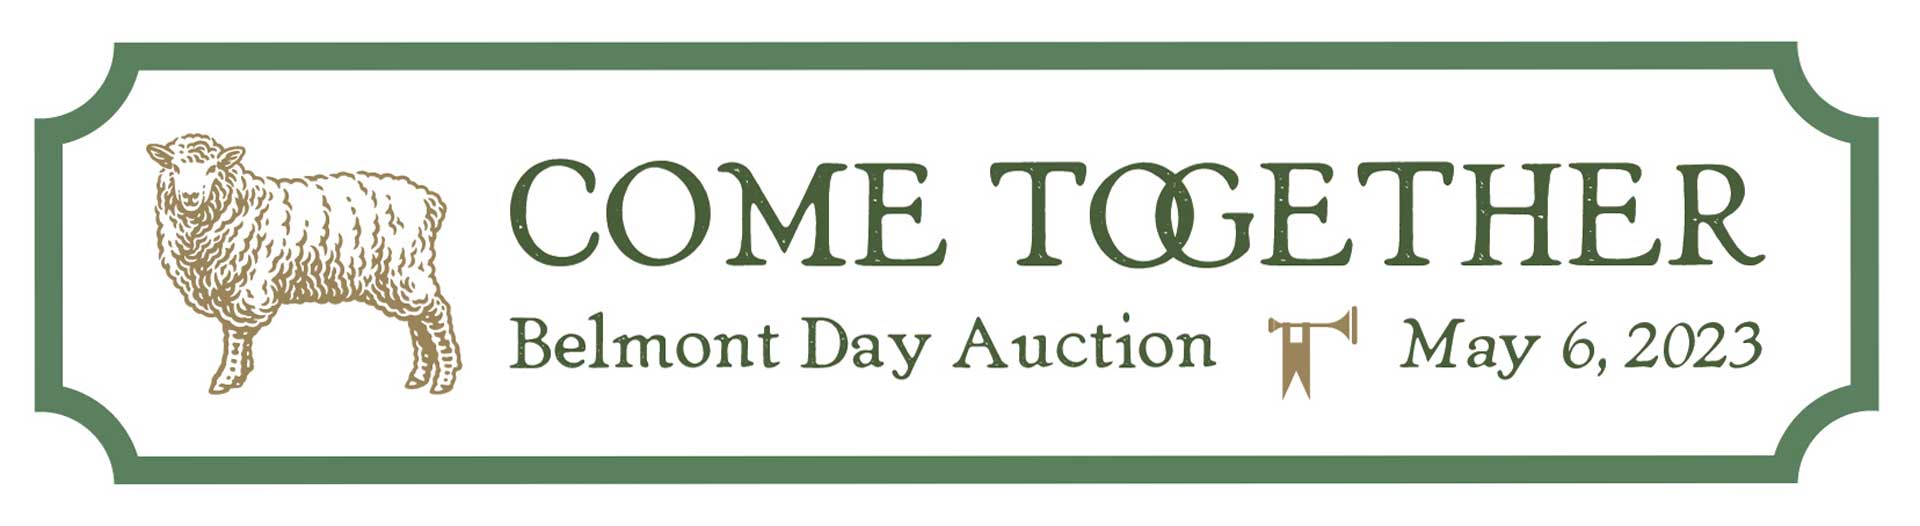 Come Together Auction logo